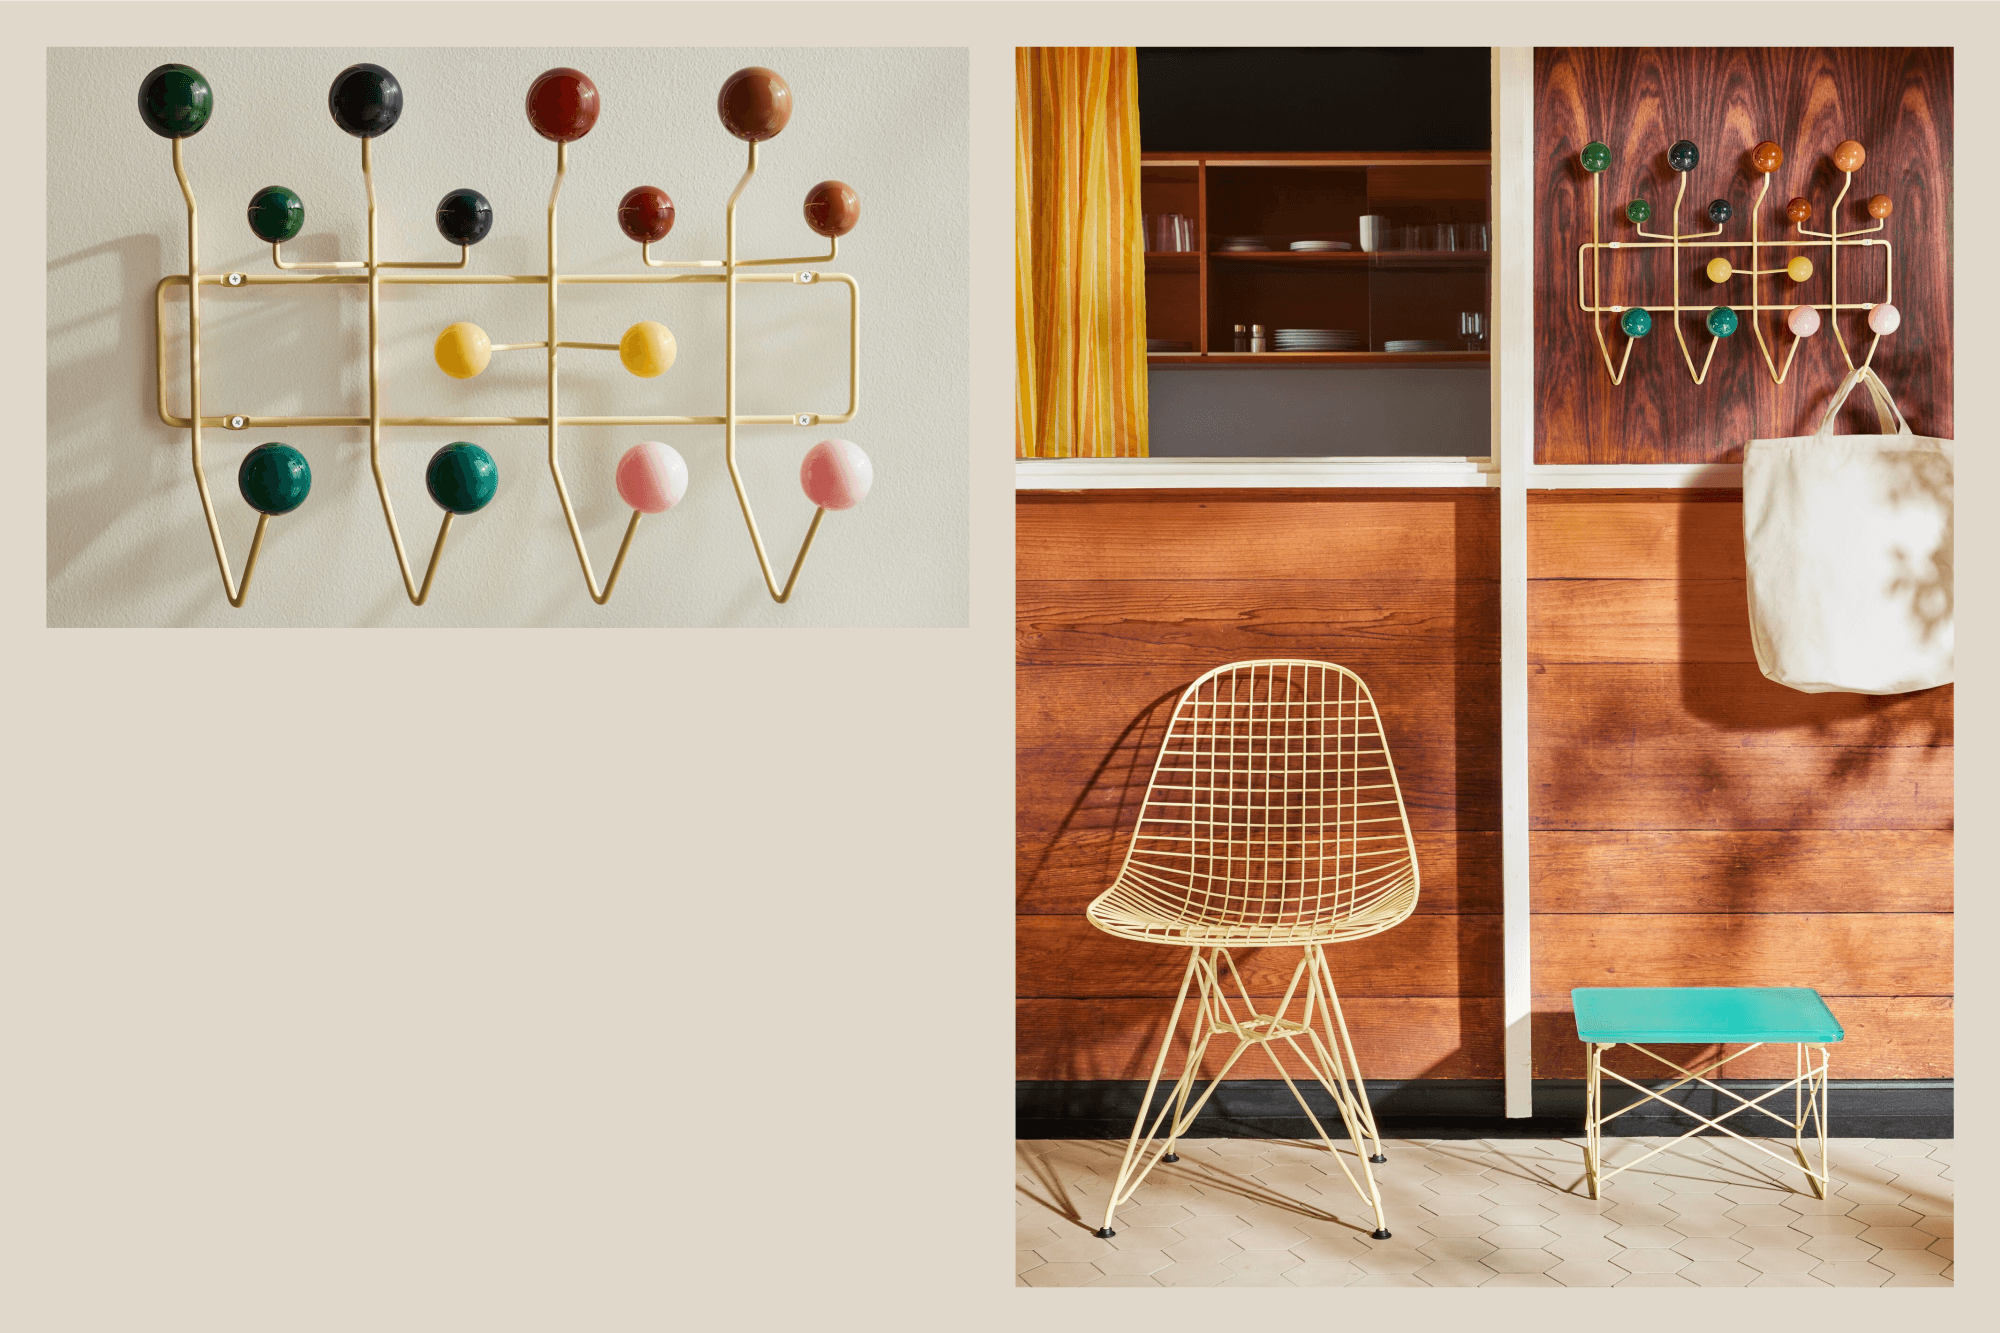 The HAY x Herman Miller Collaboration